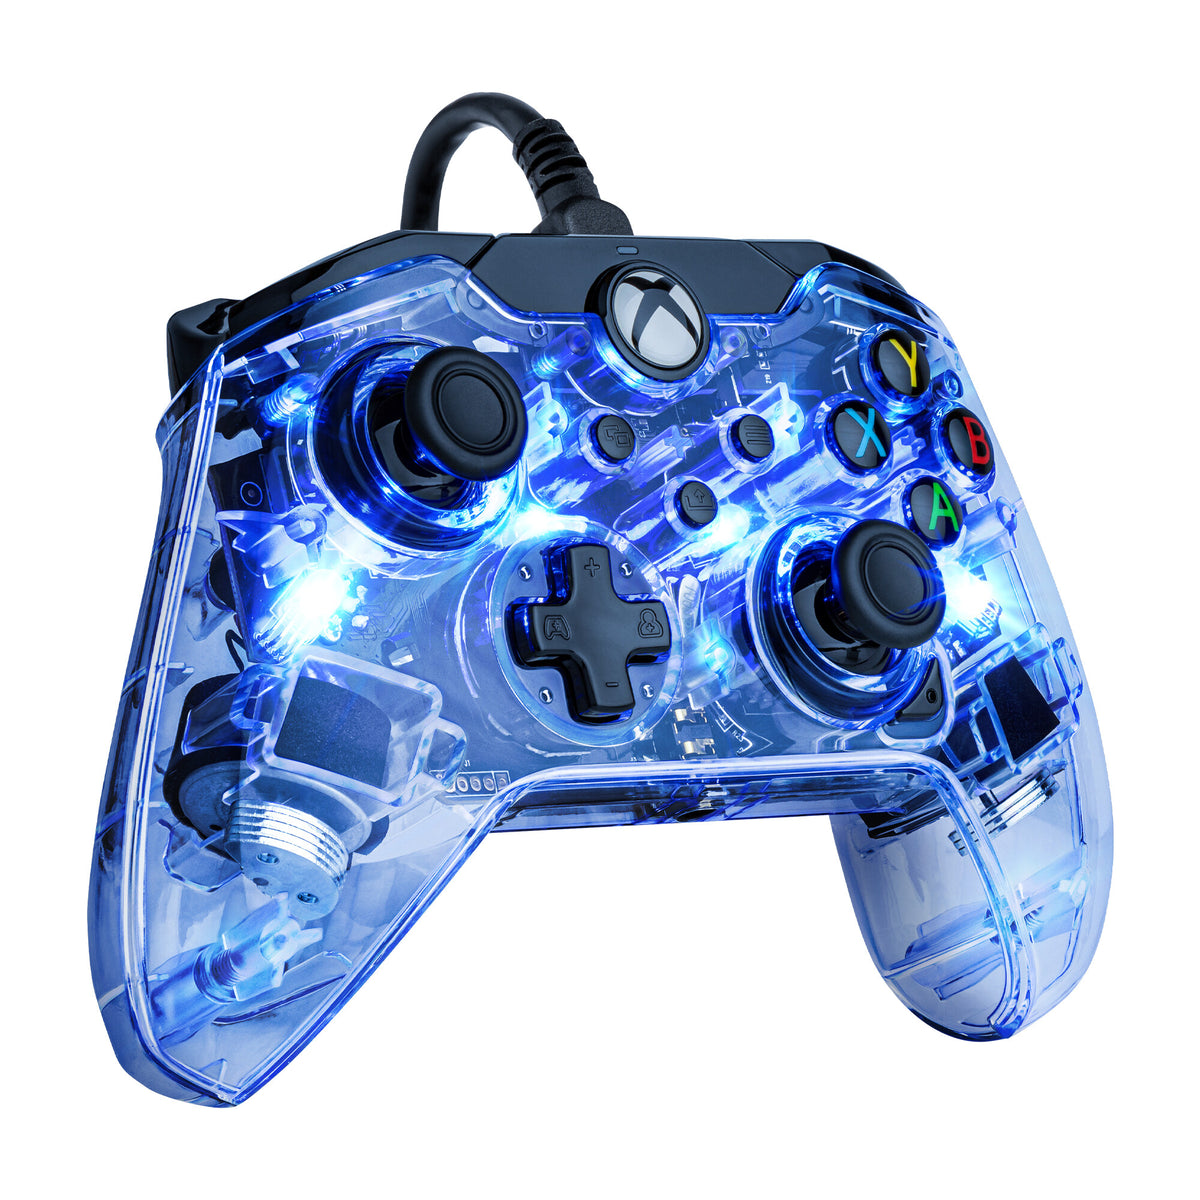 PDP Afterglow - Wired USB Gamepad for Xbox Series X|S in Transparent Blue